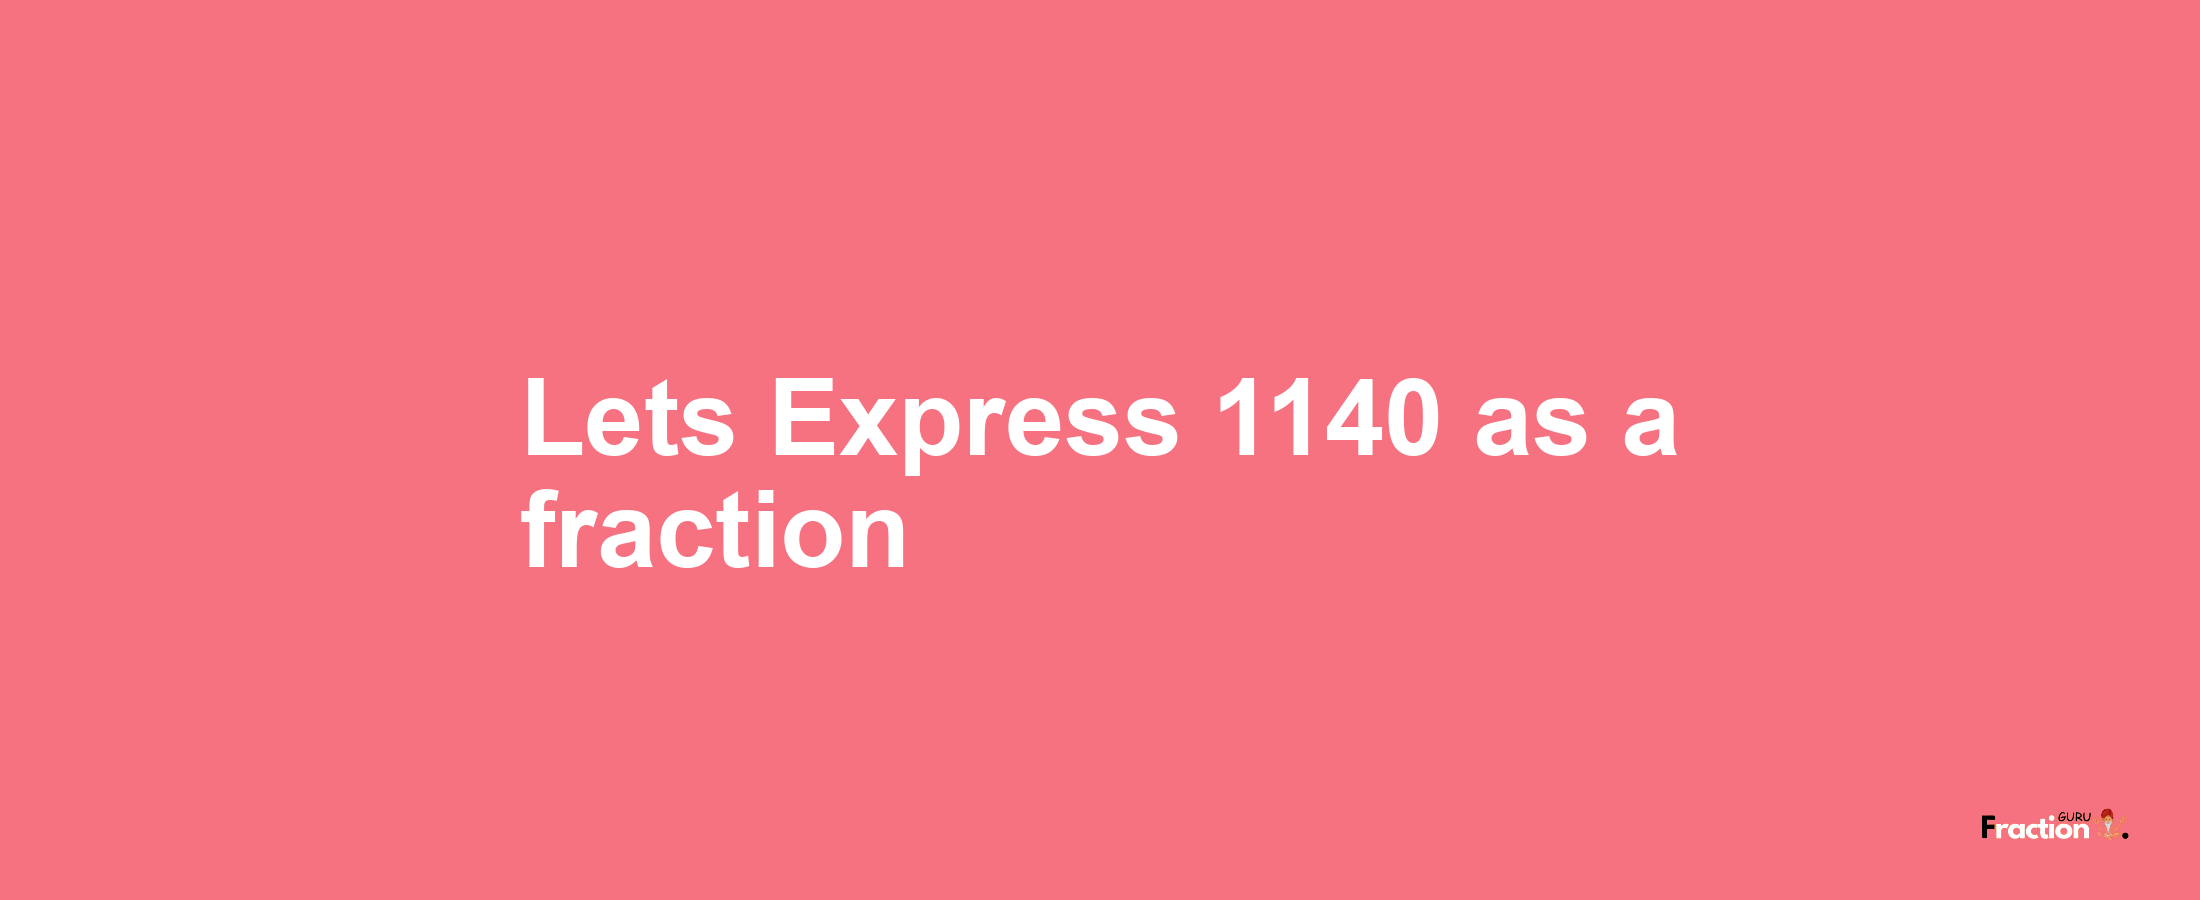 Lets Express 1140 as afraction